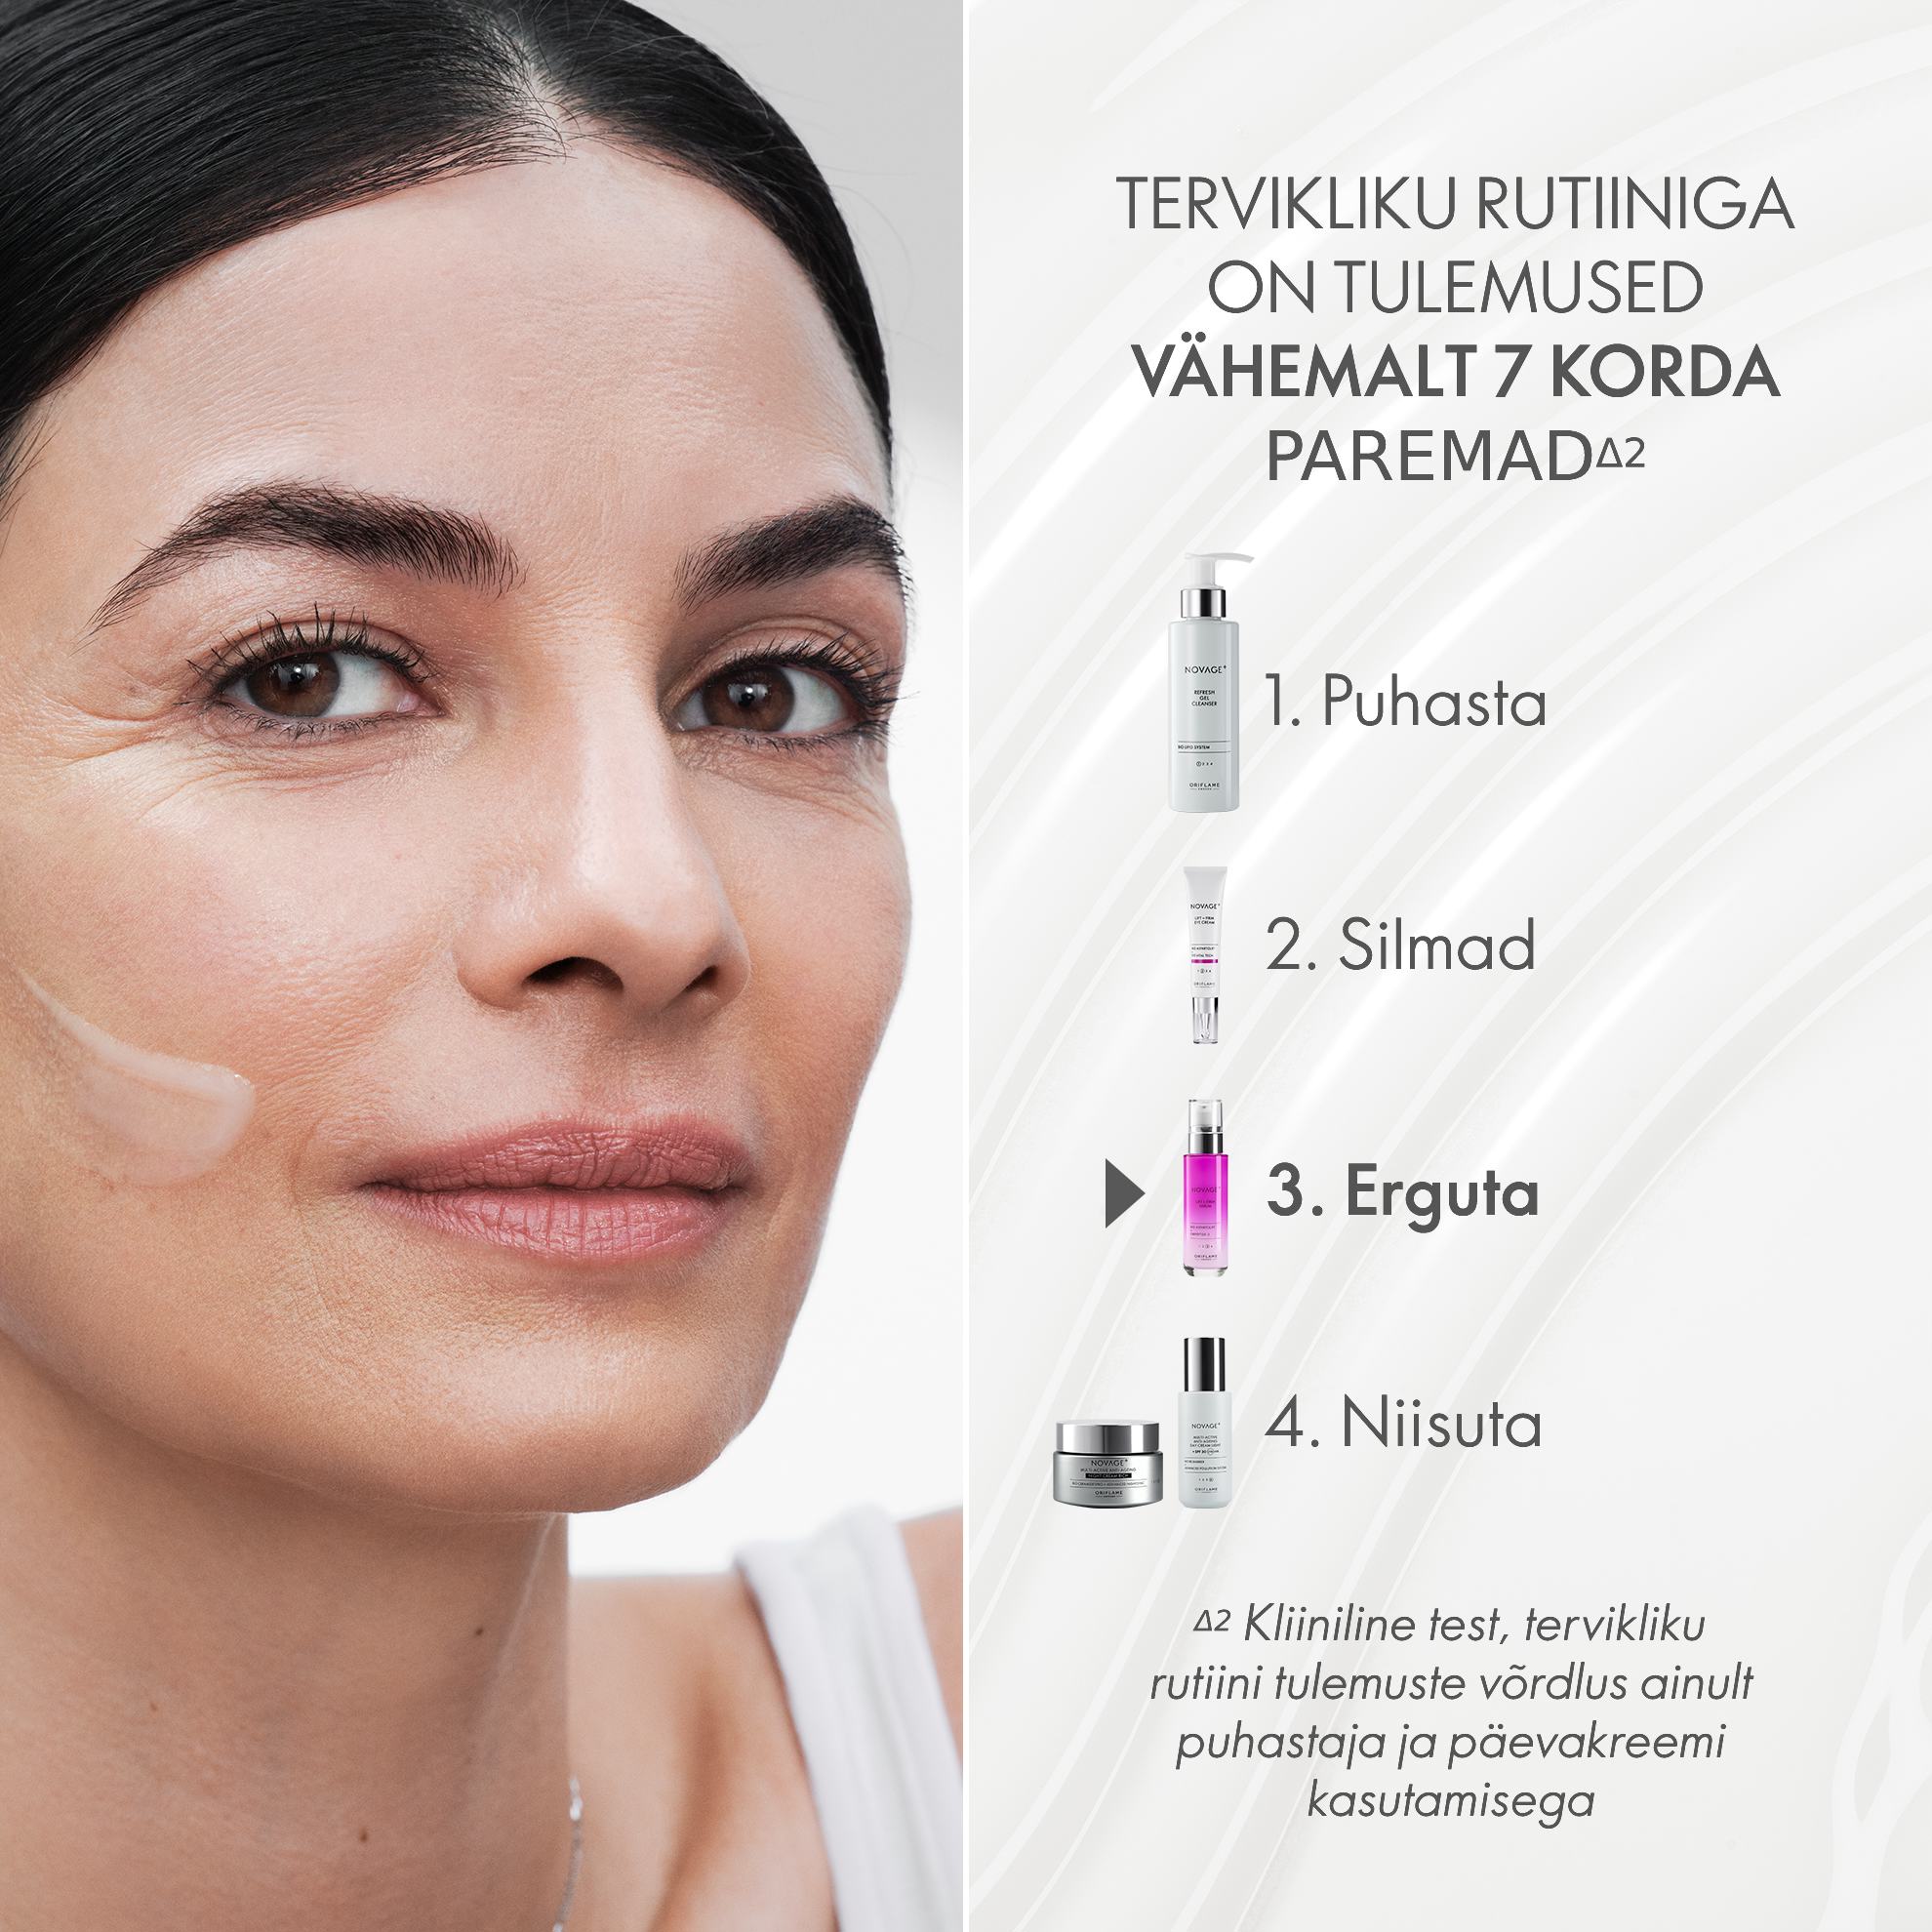 https://media-cdn.oriflame.com/productImage?externalMediaId=product-management-media%2fProducts%2f41037%2fEE%2f41037_4.png&id=17585679&version=1